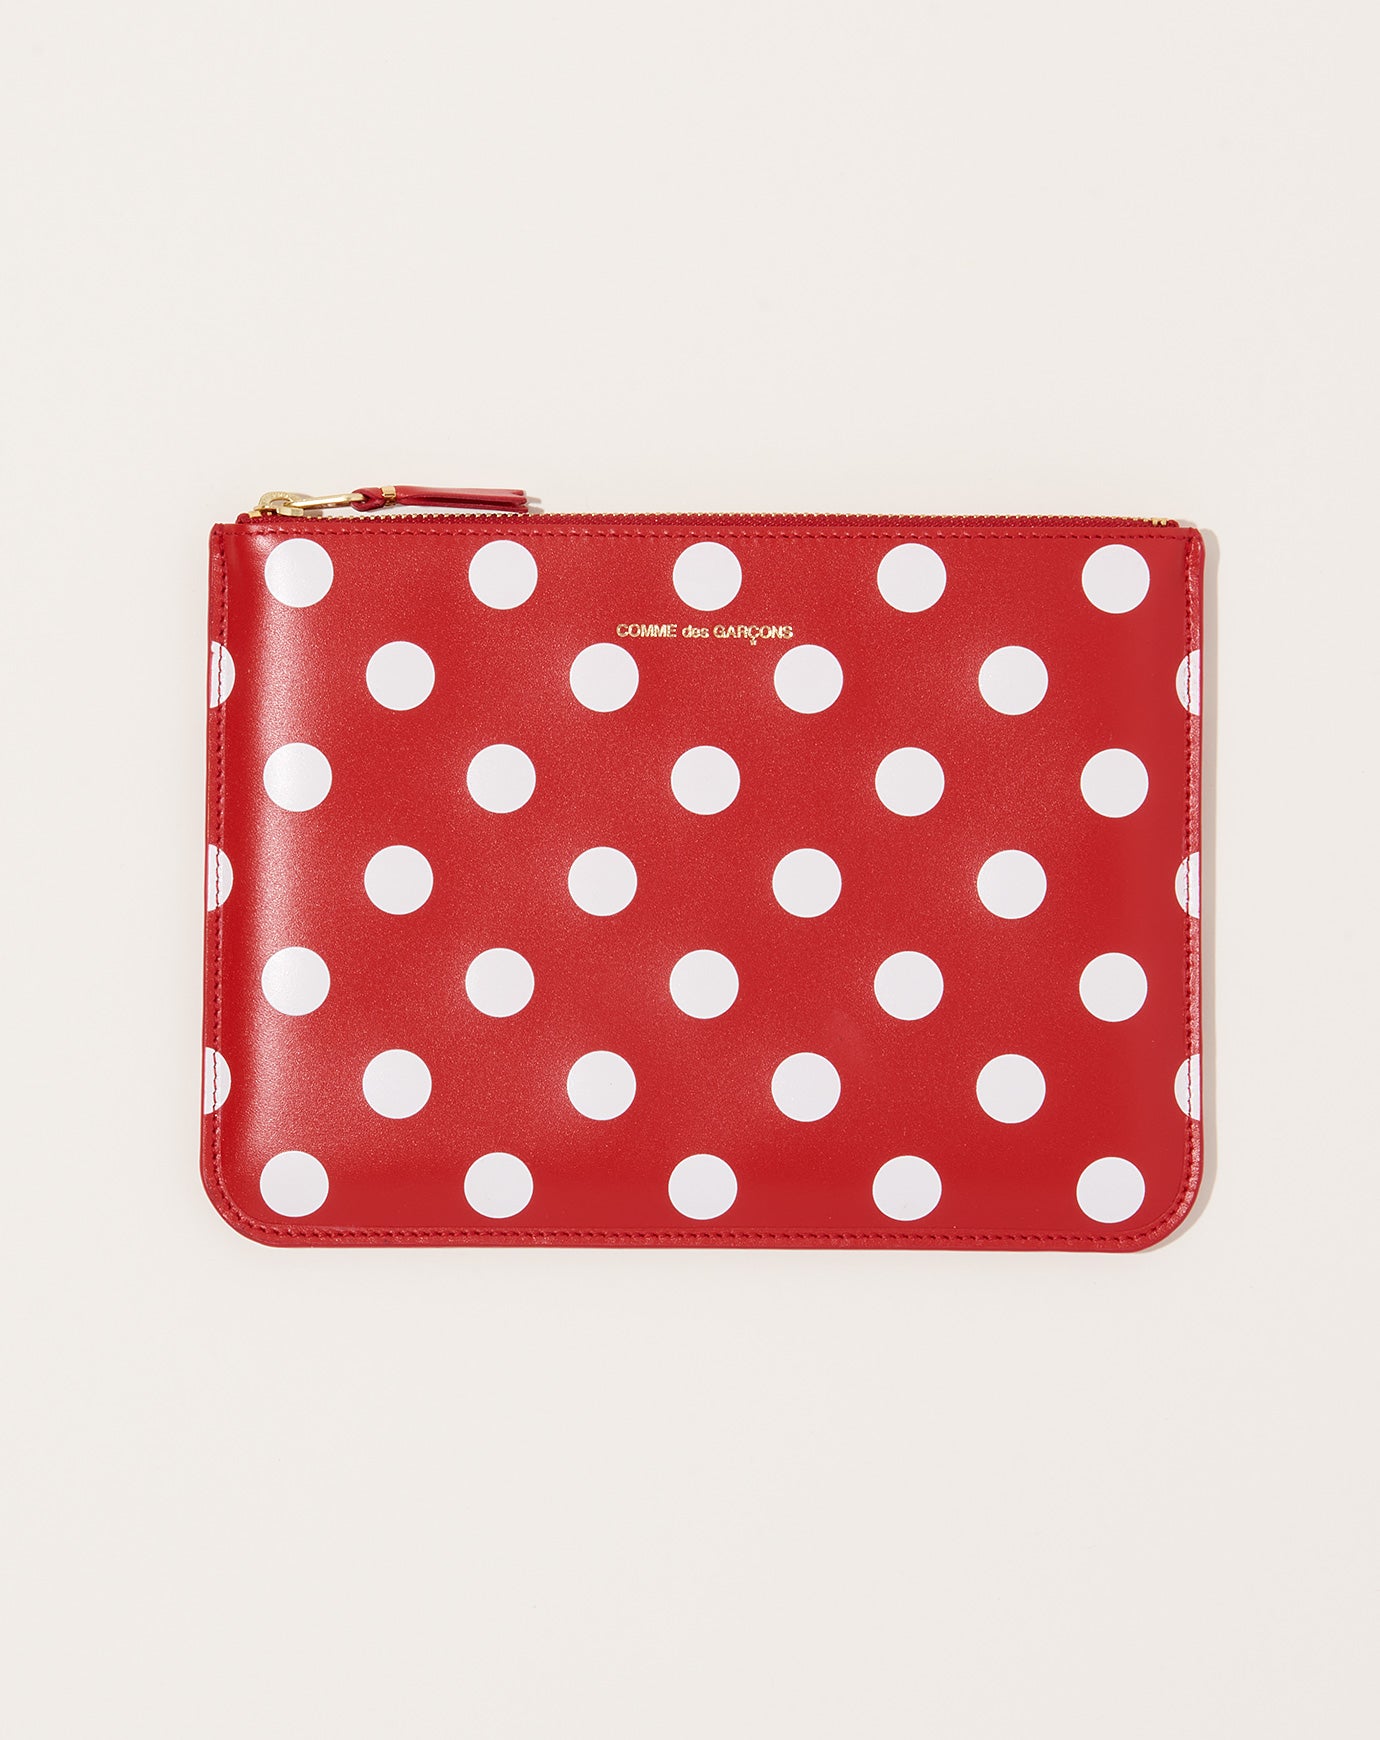 Comme des Garçons  Polka Dots Printed Wallet Pouch in Red